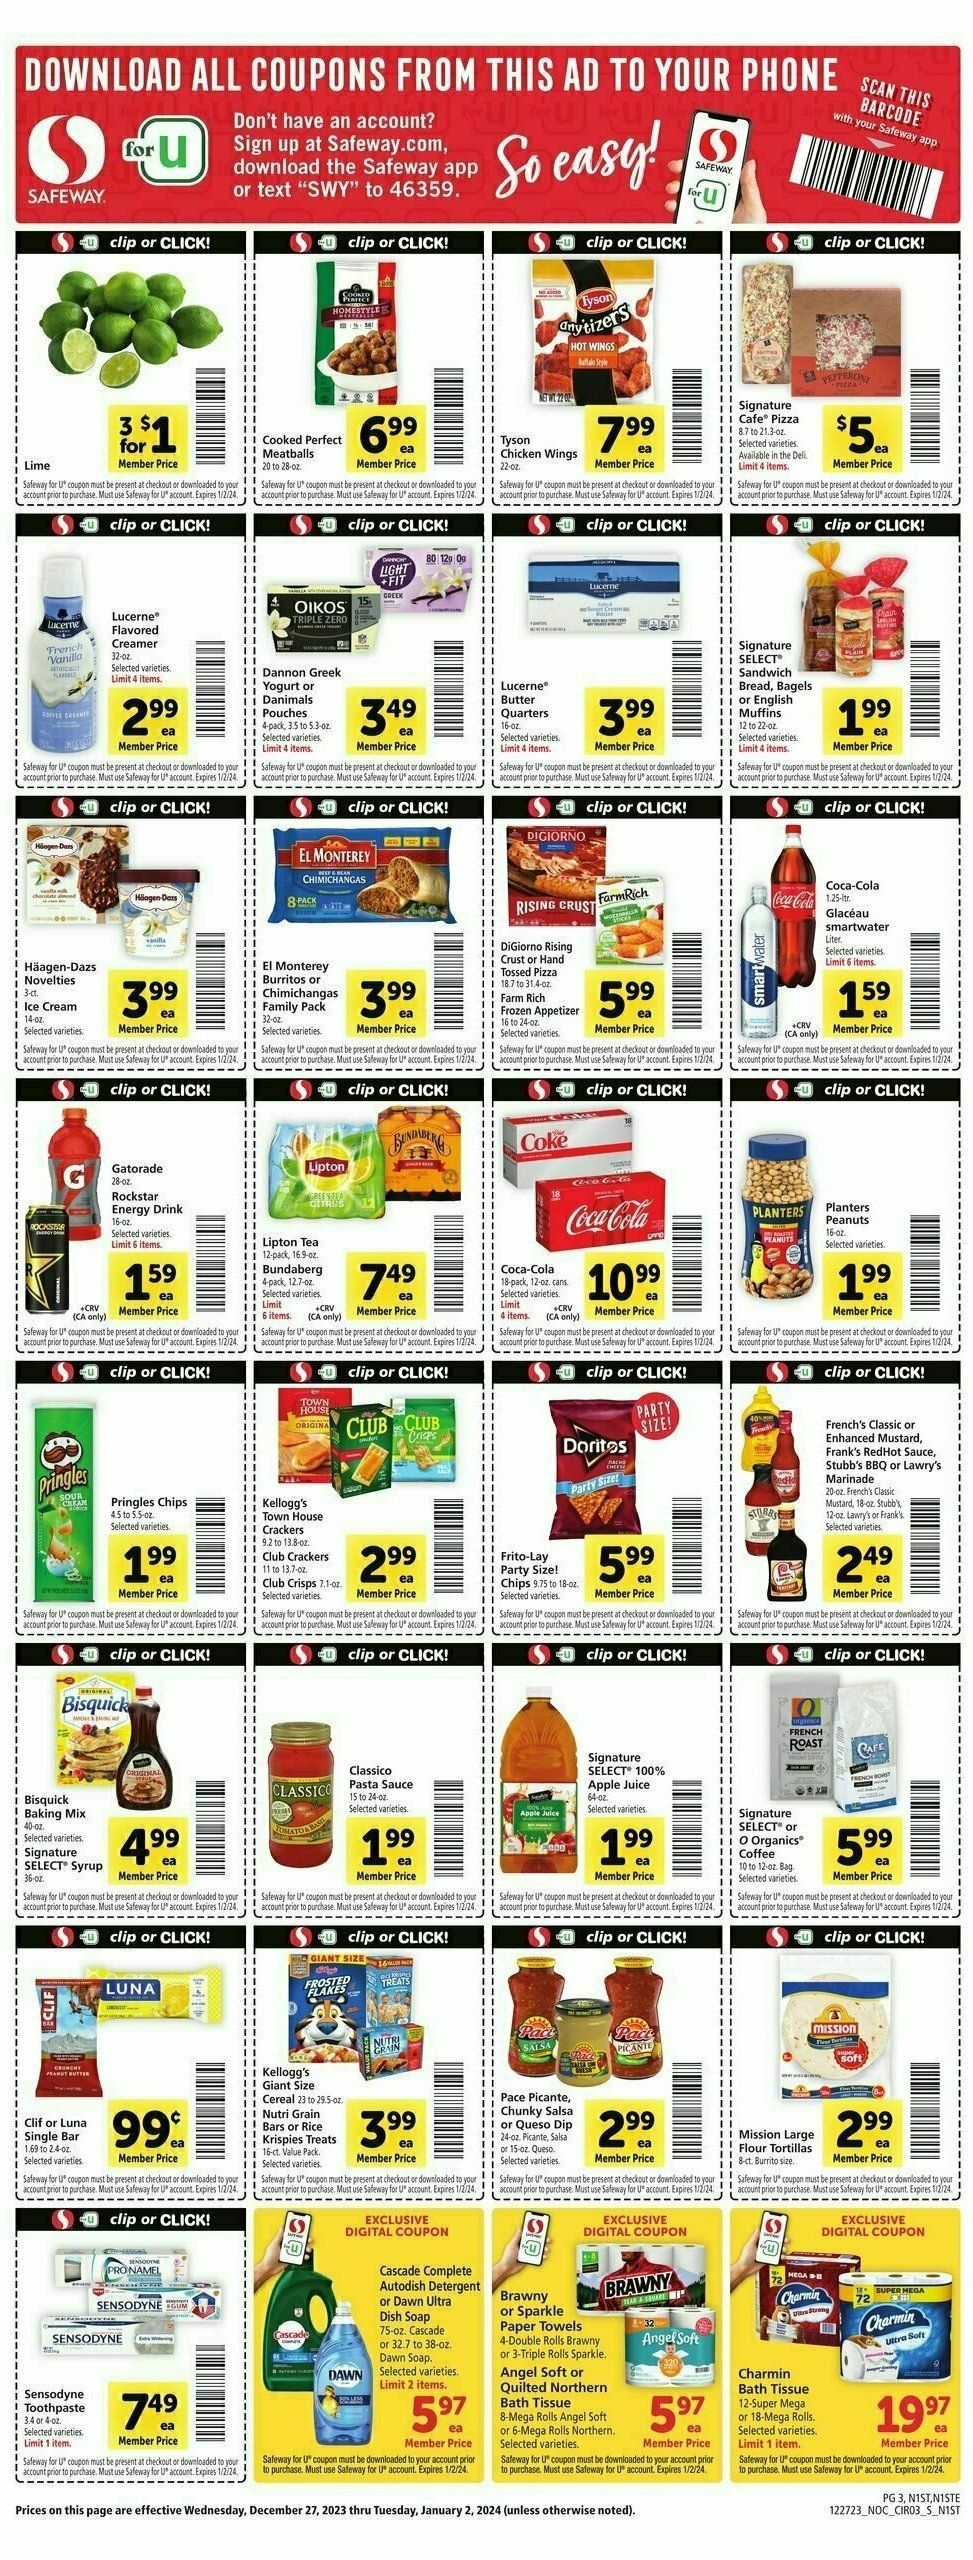 Safeway Weekly Ad from December 27